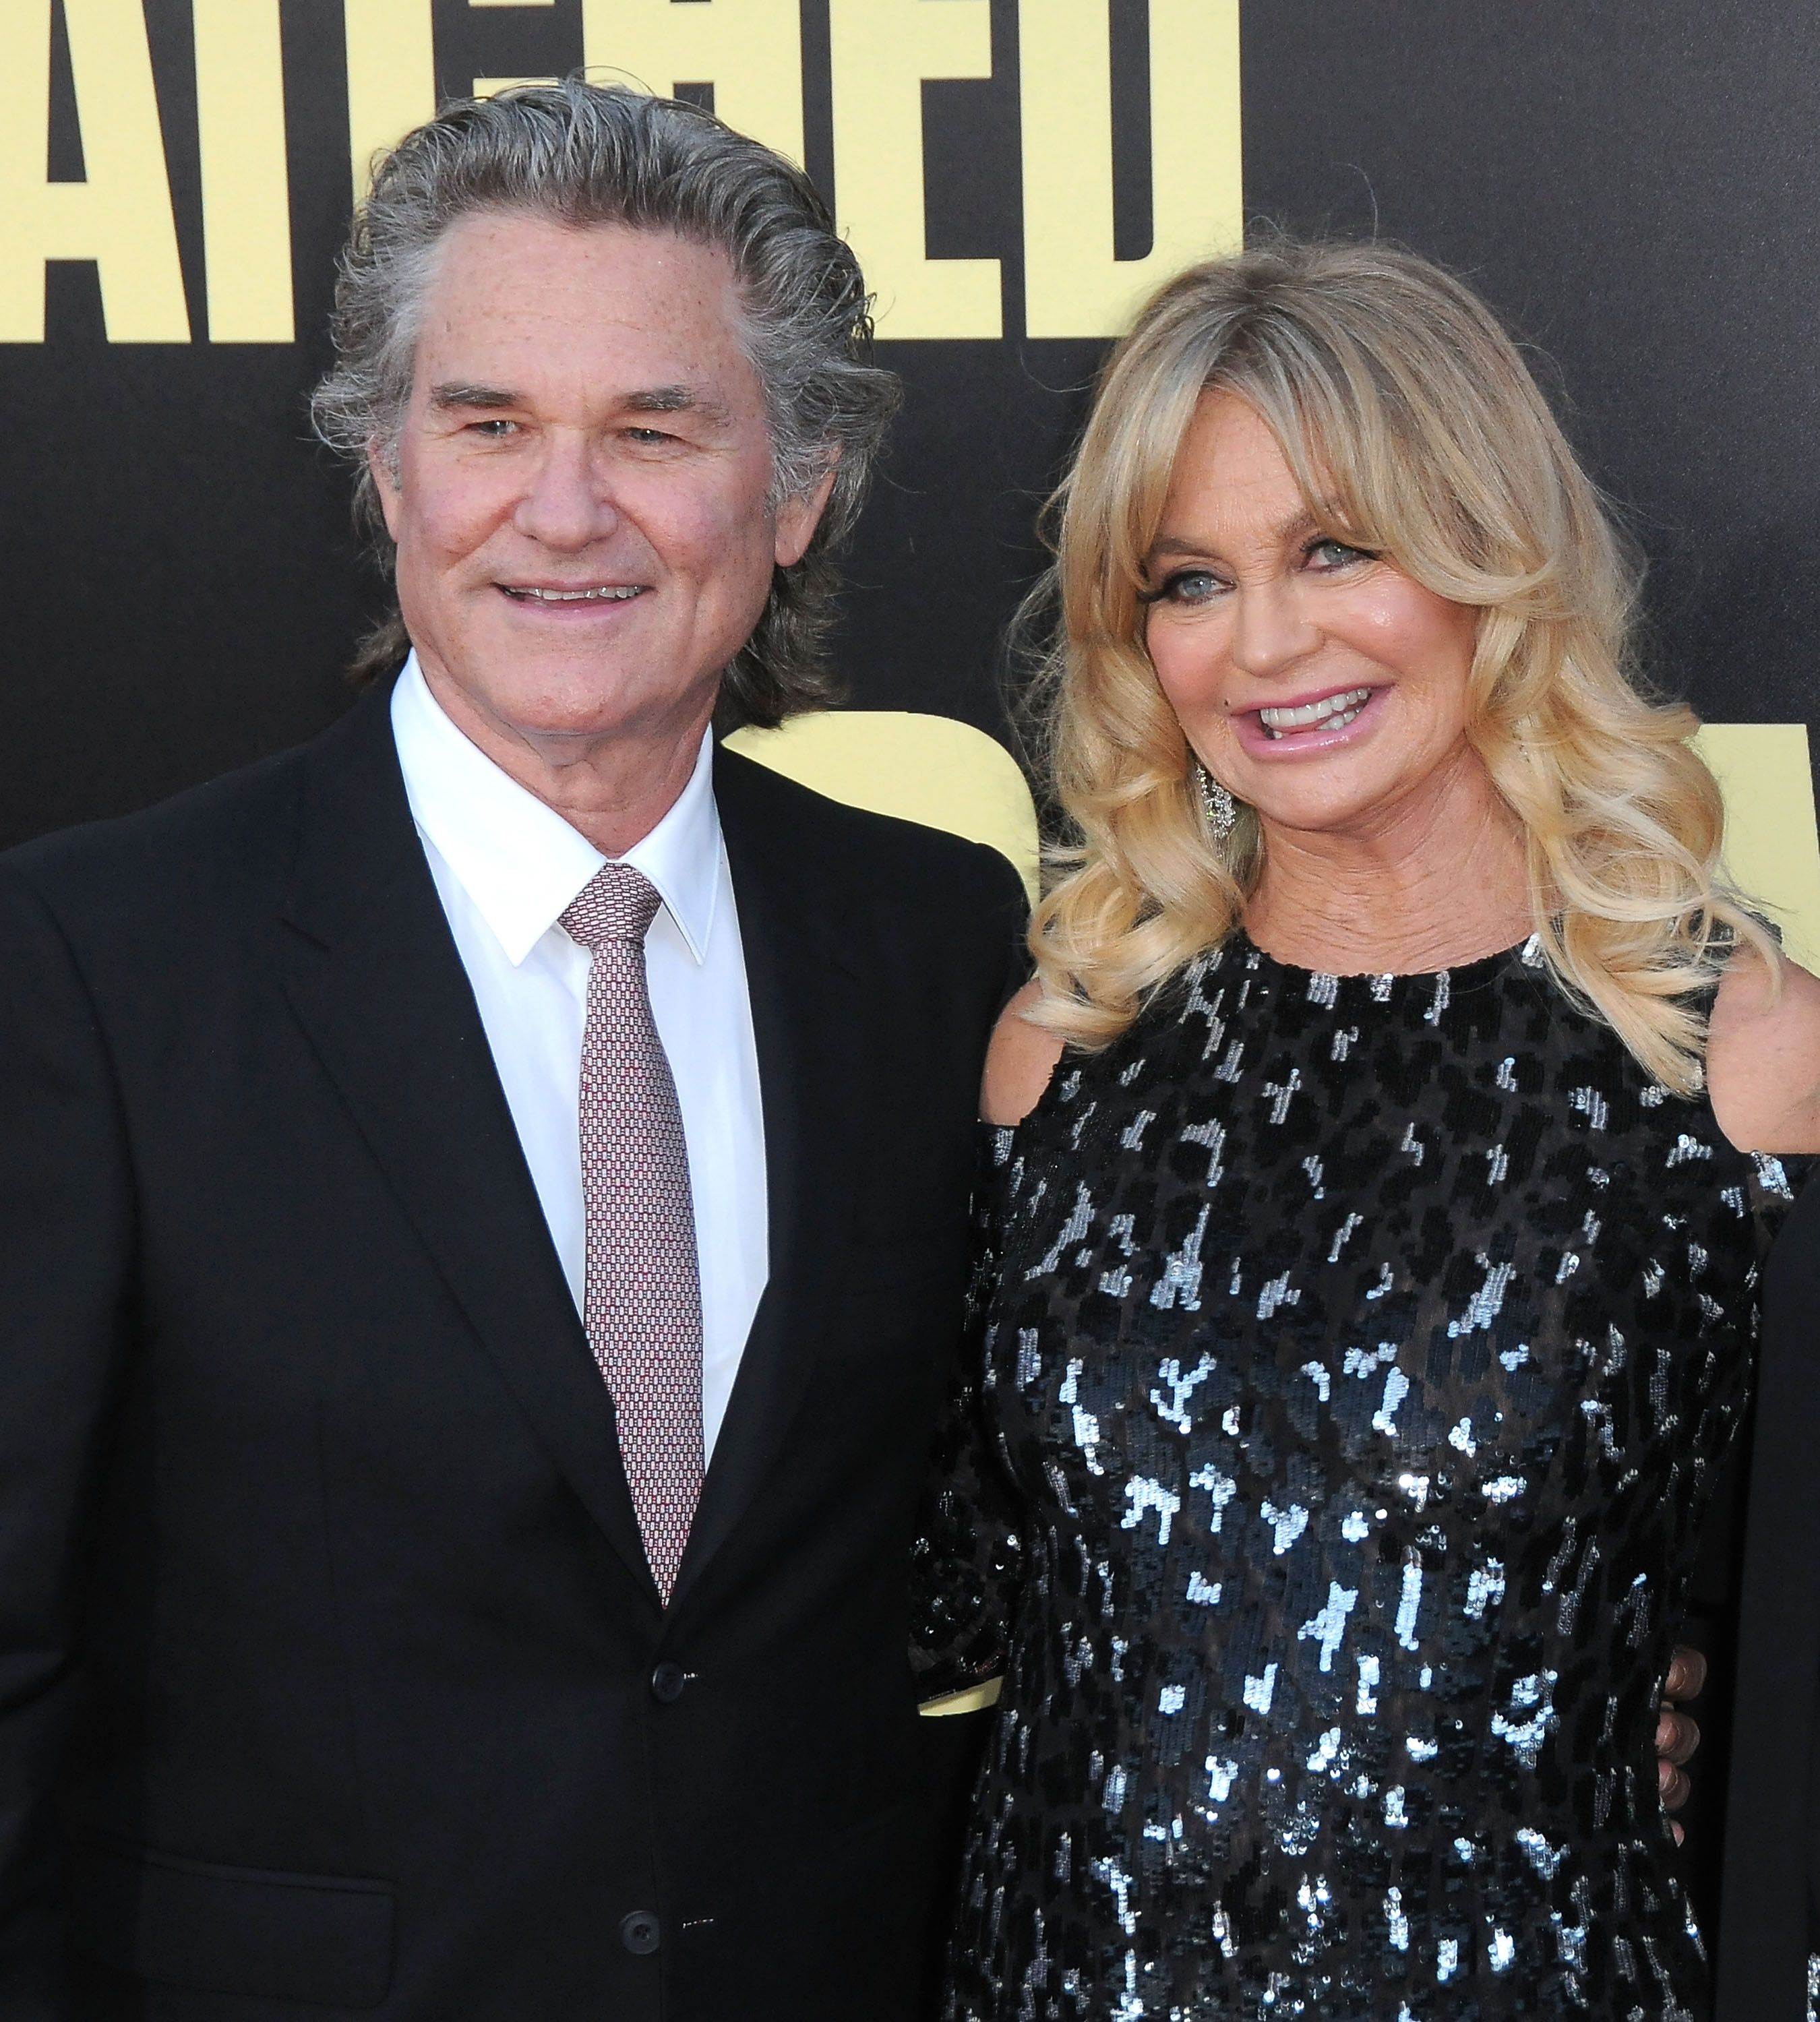 Kurt Russell and Goldie Hawn during premiere of 20th Century Fox's "Snatched" at Regency Village Theater on May 10, 2017 in Westwood, California | Source: Getty Images